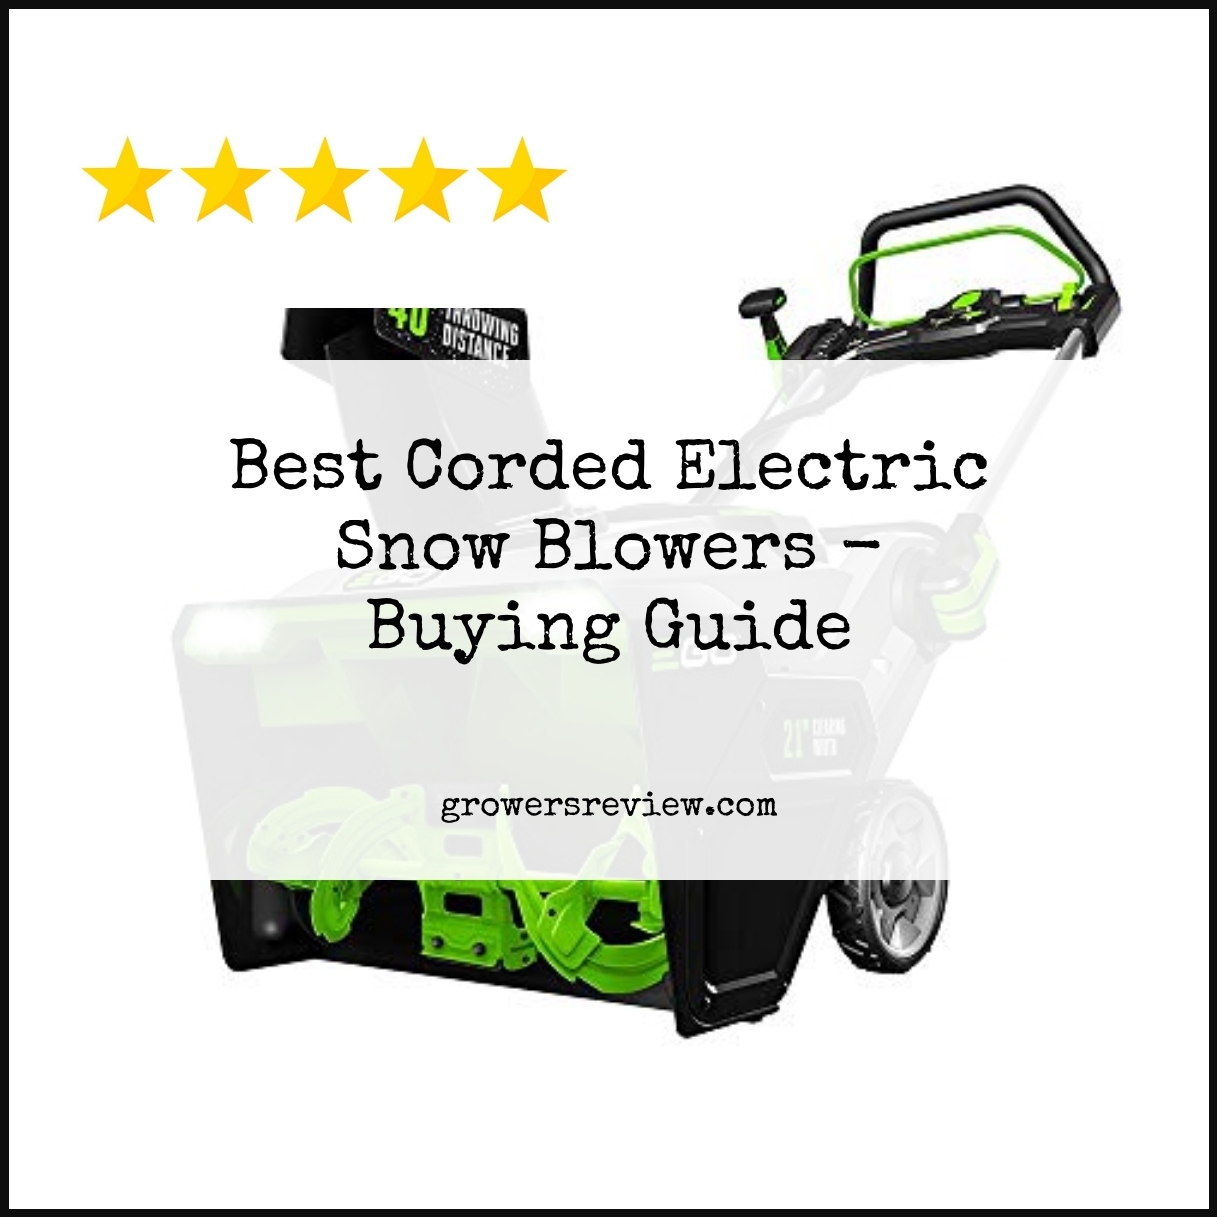 Best Corded Electric Snow Blowers - Buying Guide